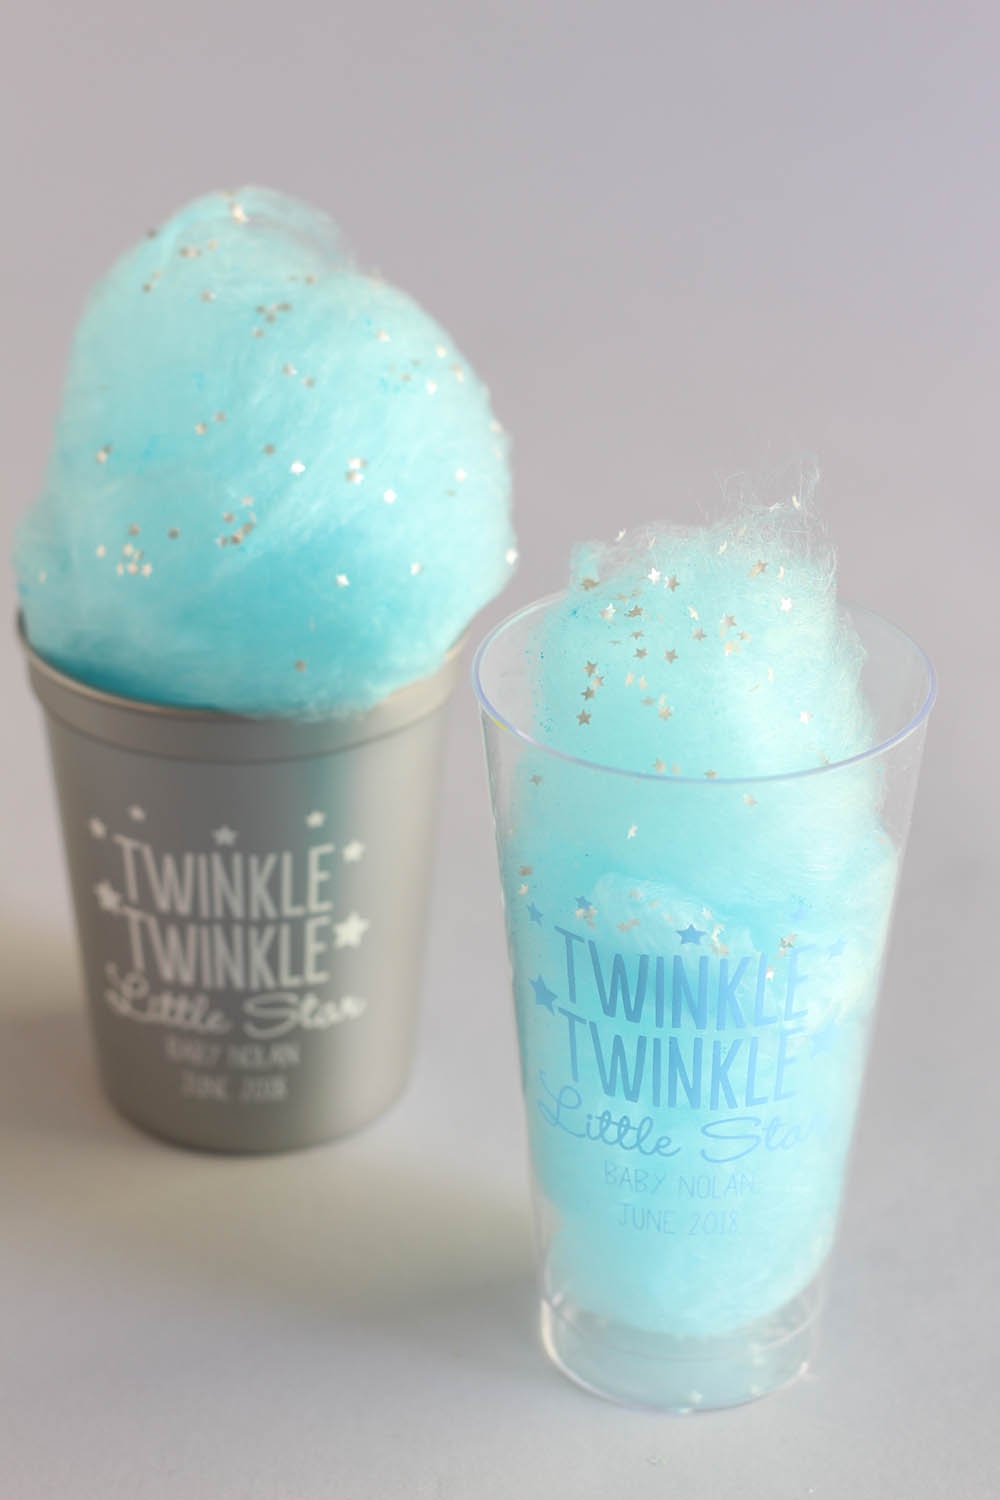 diy cotton candy, cotton candy favor, cotton candy baby shower favor, blue cotton candy, twinkle twinkle baby shower, cotton candy favor, star glitter, edible star glitter 